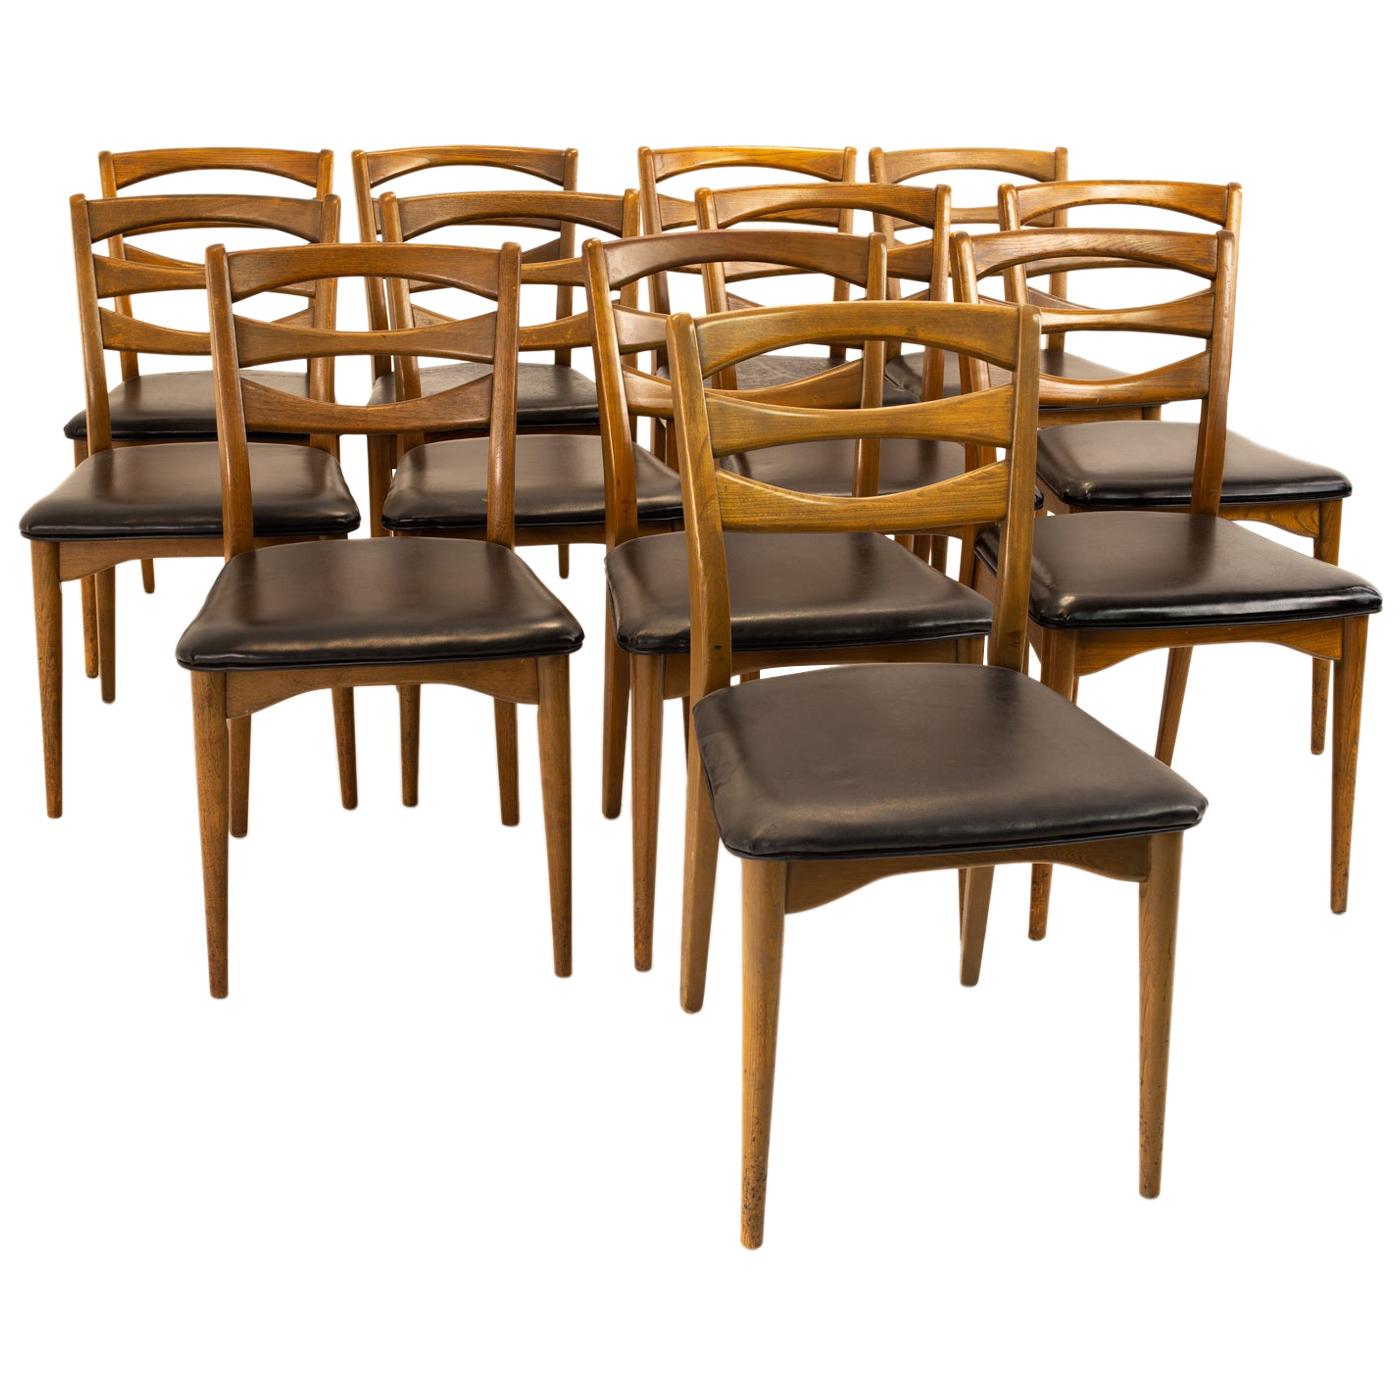 Lawrence Peabody for Nemschoff Model 300 MCM Walnut Dining Chairs, Set of 12